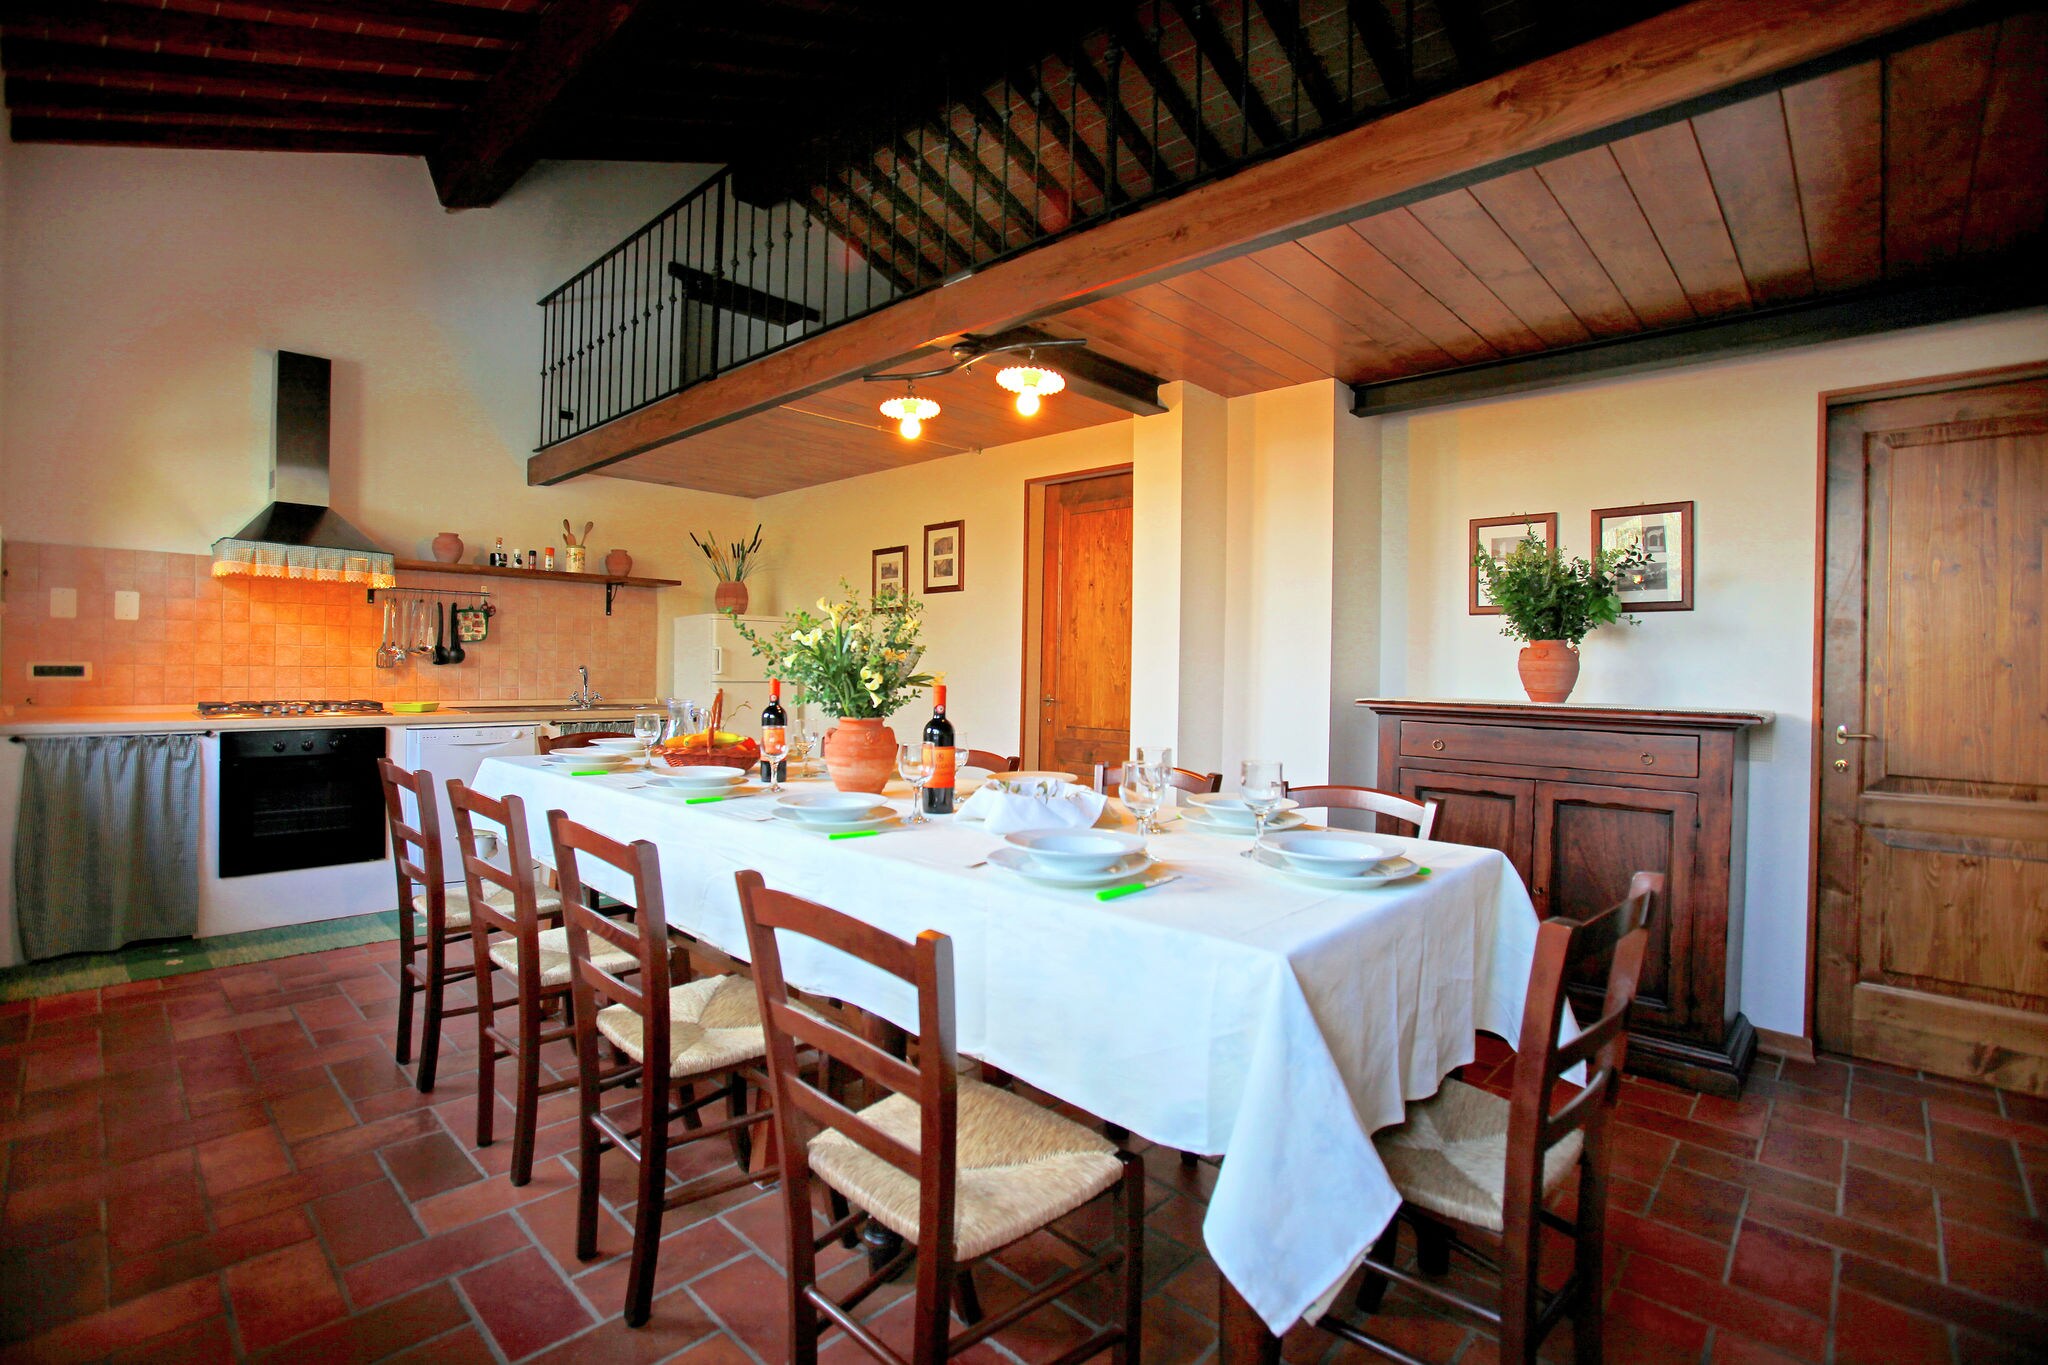 Villa with private swimming pool, spacious garden and magnificent views, 2km away from the town